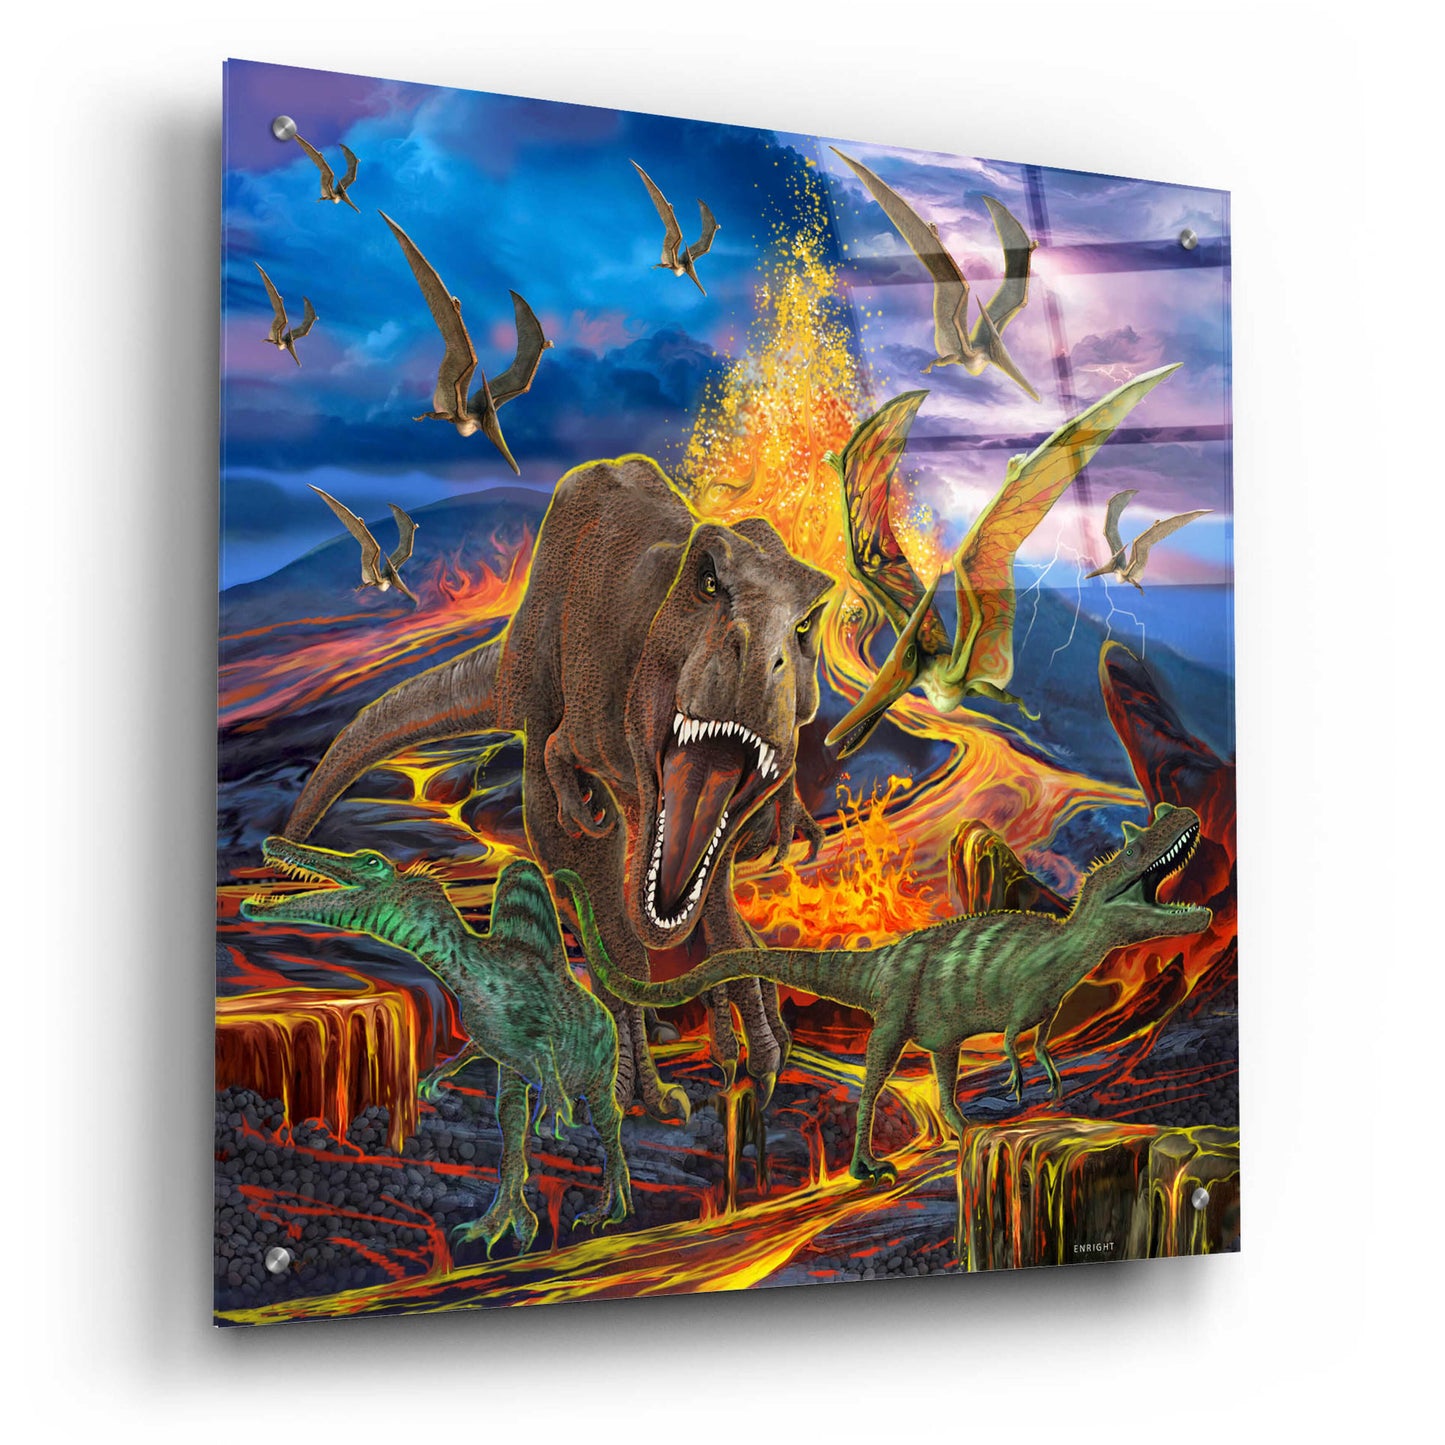 Epic Art 'Kingdom Of The Dinosaurs' by Enright, Acrylic Glass Wall Art,24x24